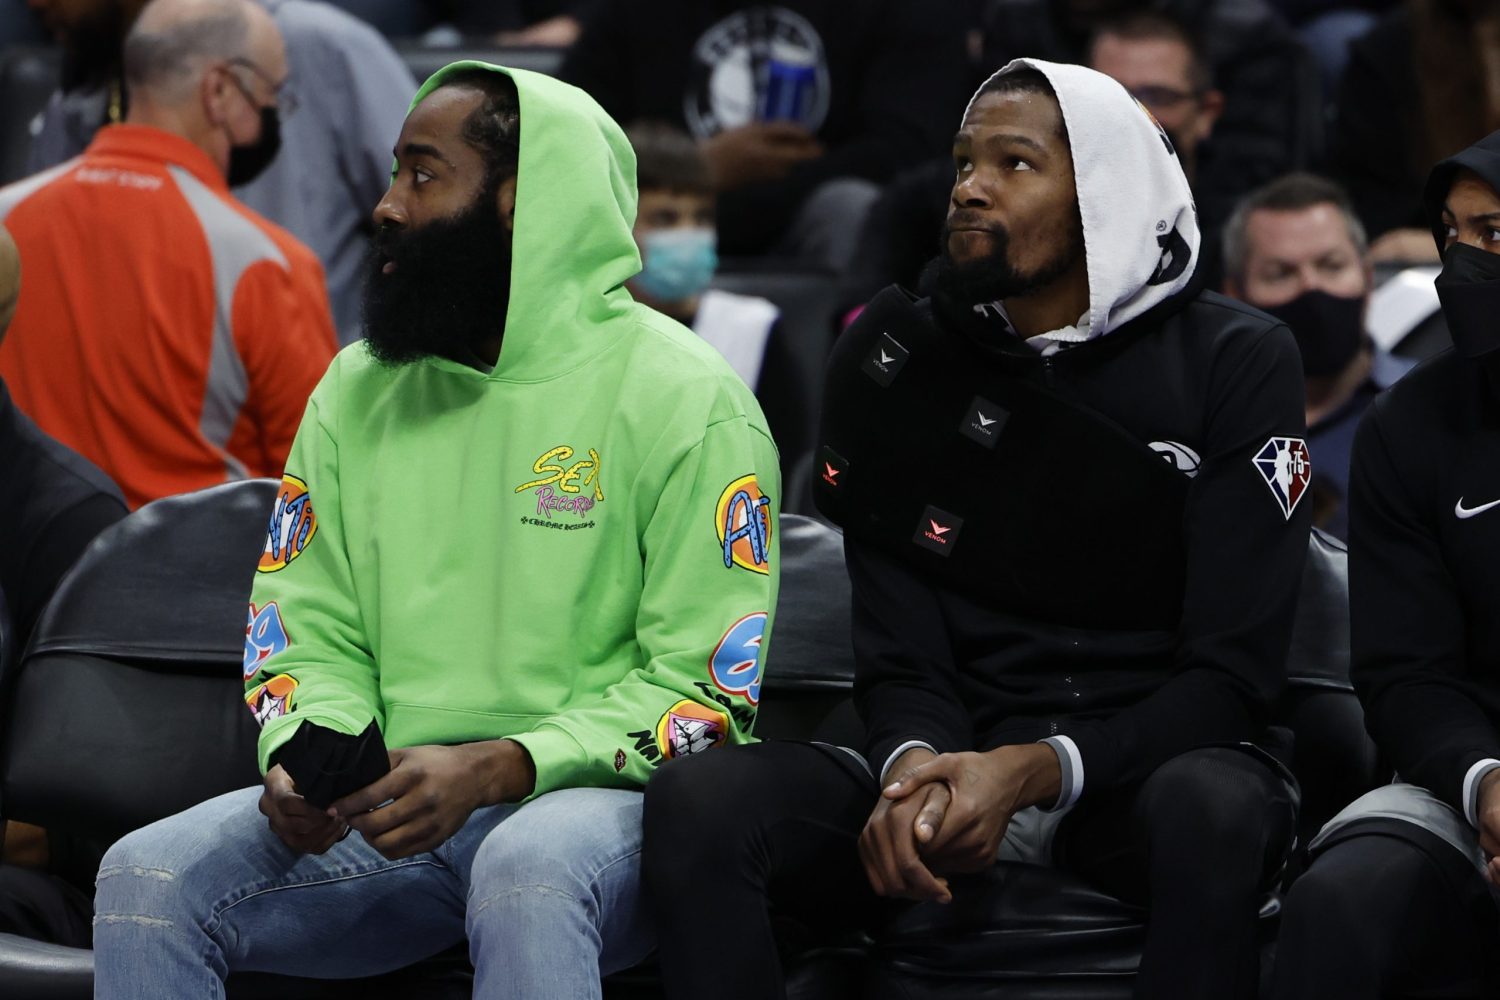 James Harden and Kevin Durant